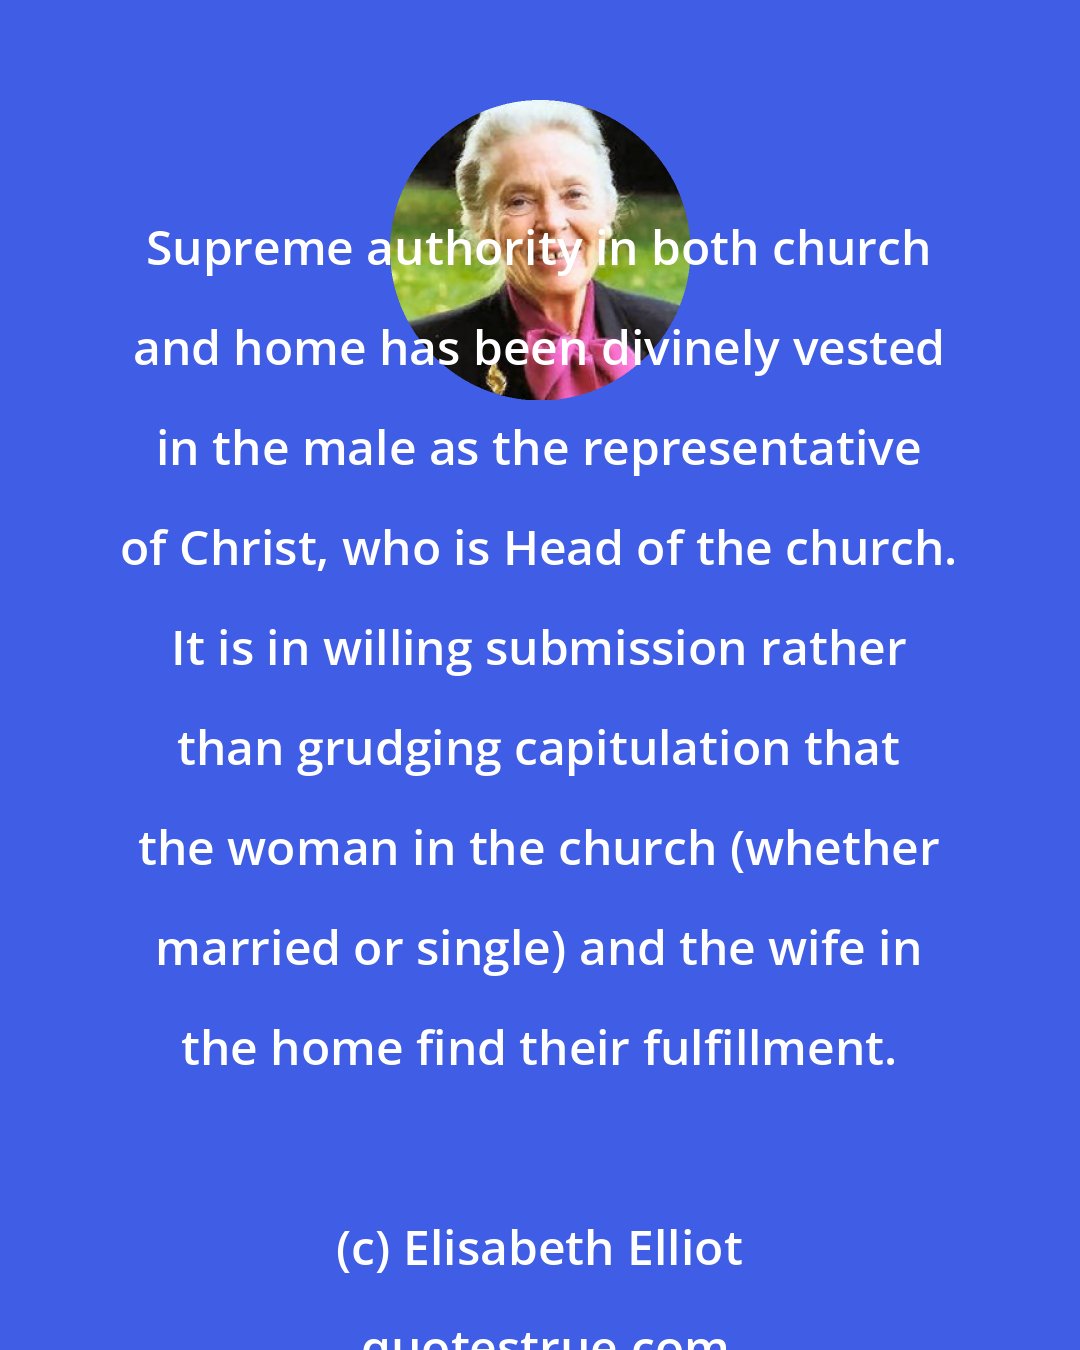 Elisabeth Elliot: Supreme authority in both church and home has been divinely vested in the male as the representative of Christ, who is Head of the church. It is in willing submission rather than grudging capitulation that the woman in the church (whether married or single) and the wife in the home find their fulfillment.